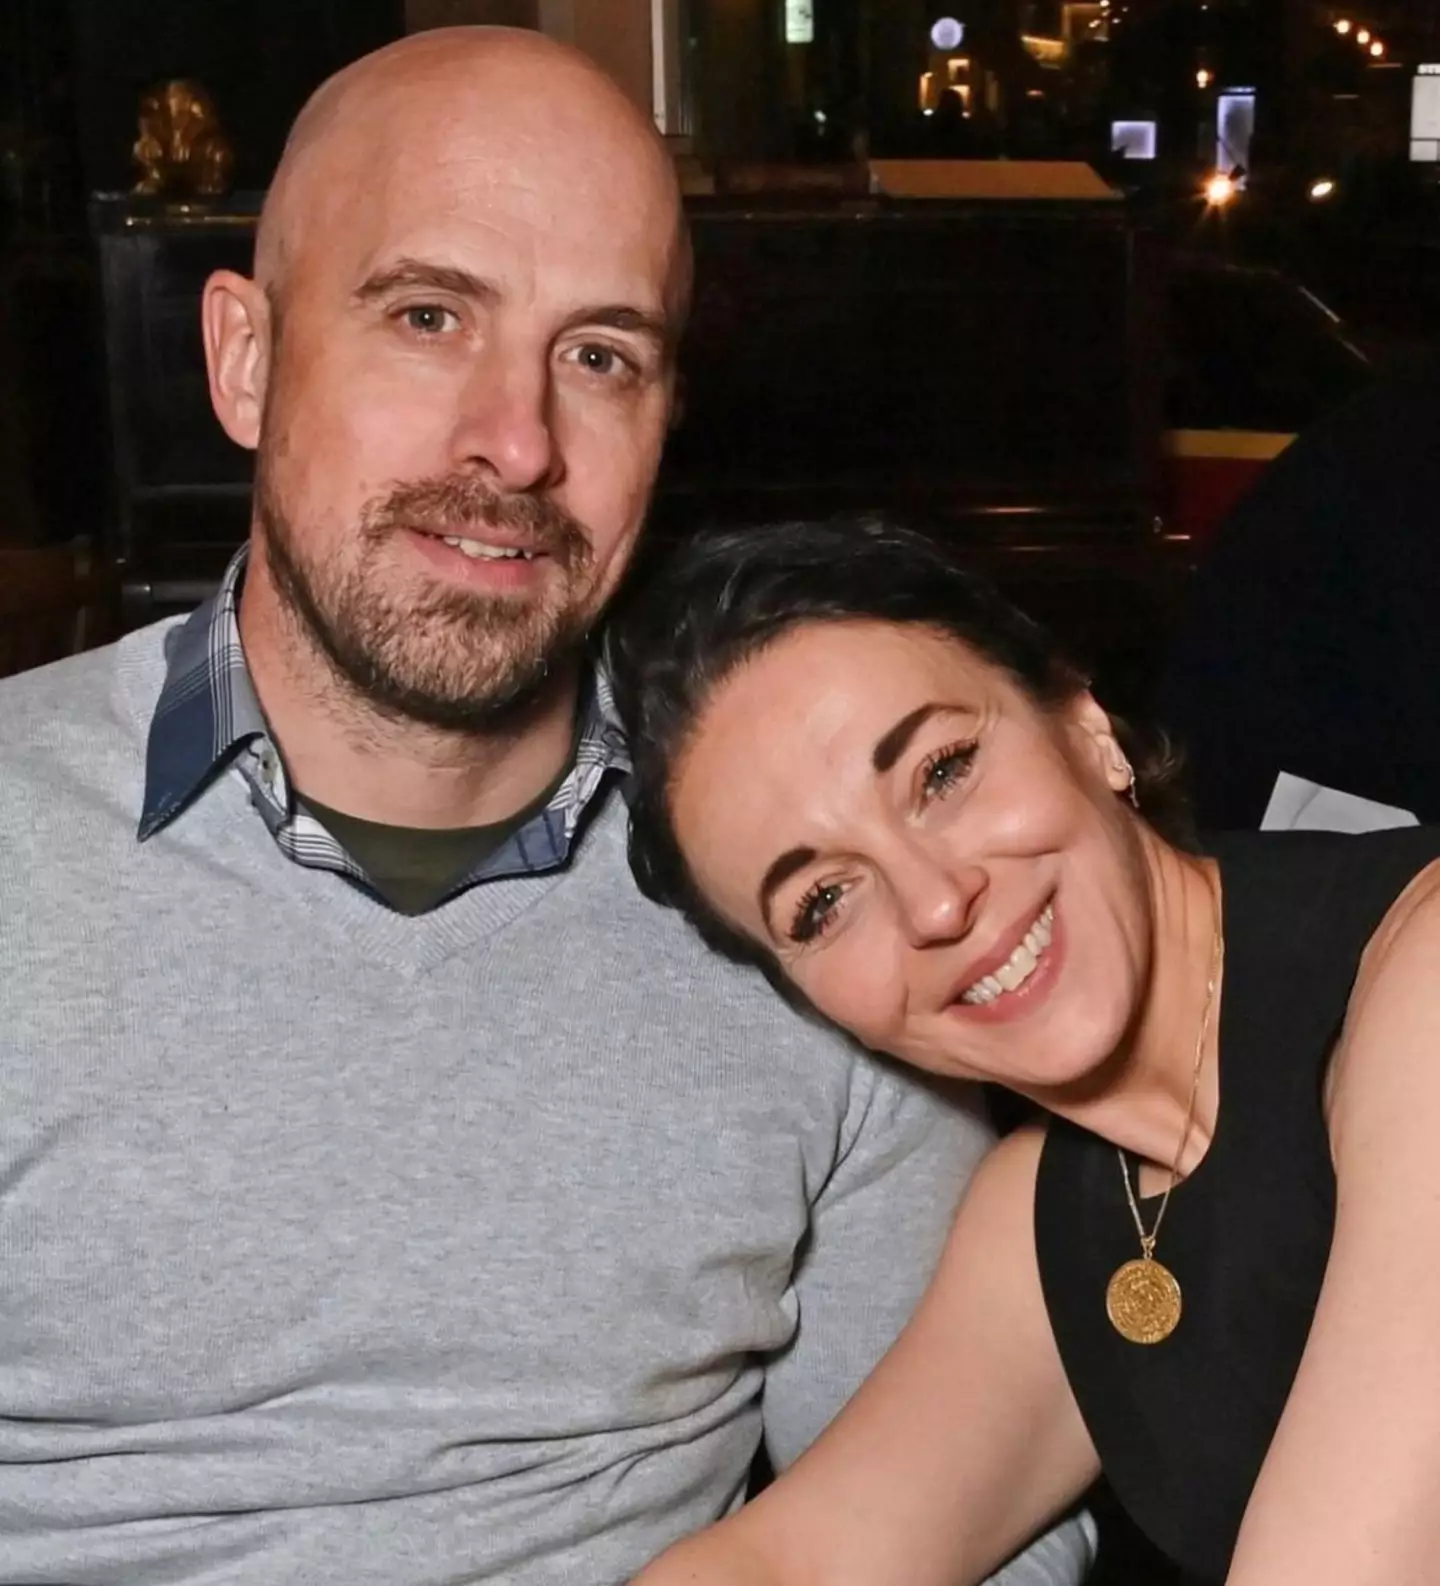 Amanda Abbington's fiancé shared a cryptic Instagram post just hours before she withdrew from Strictly.